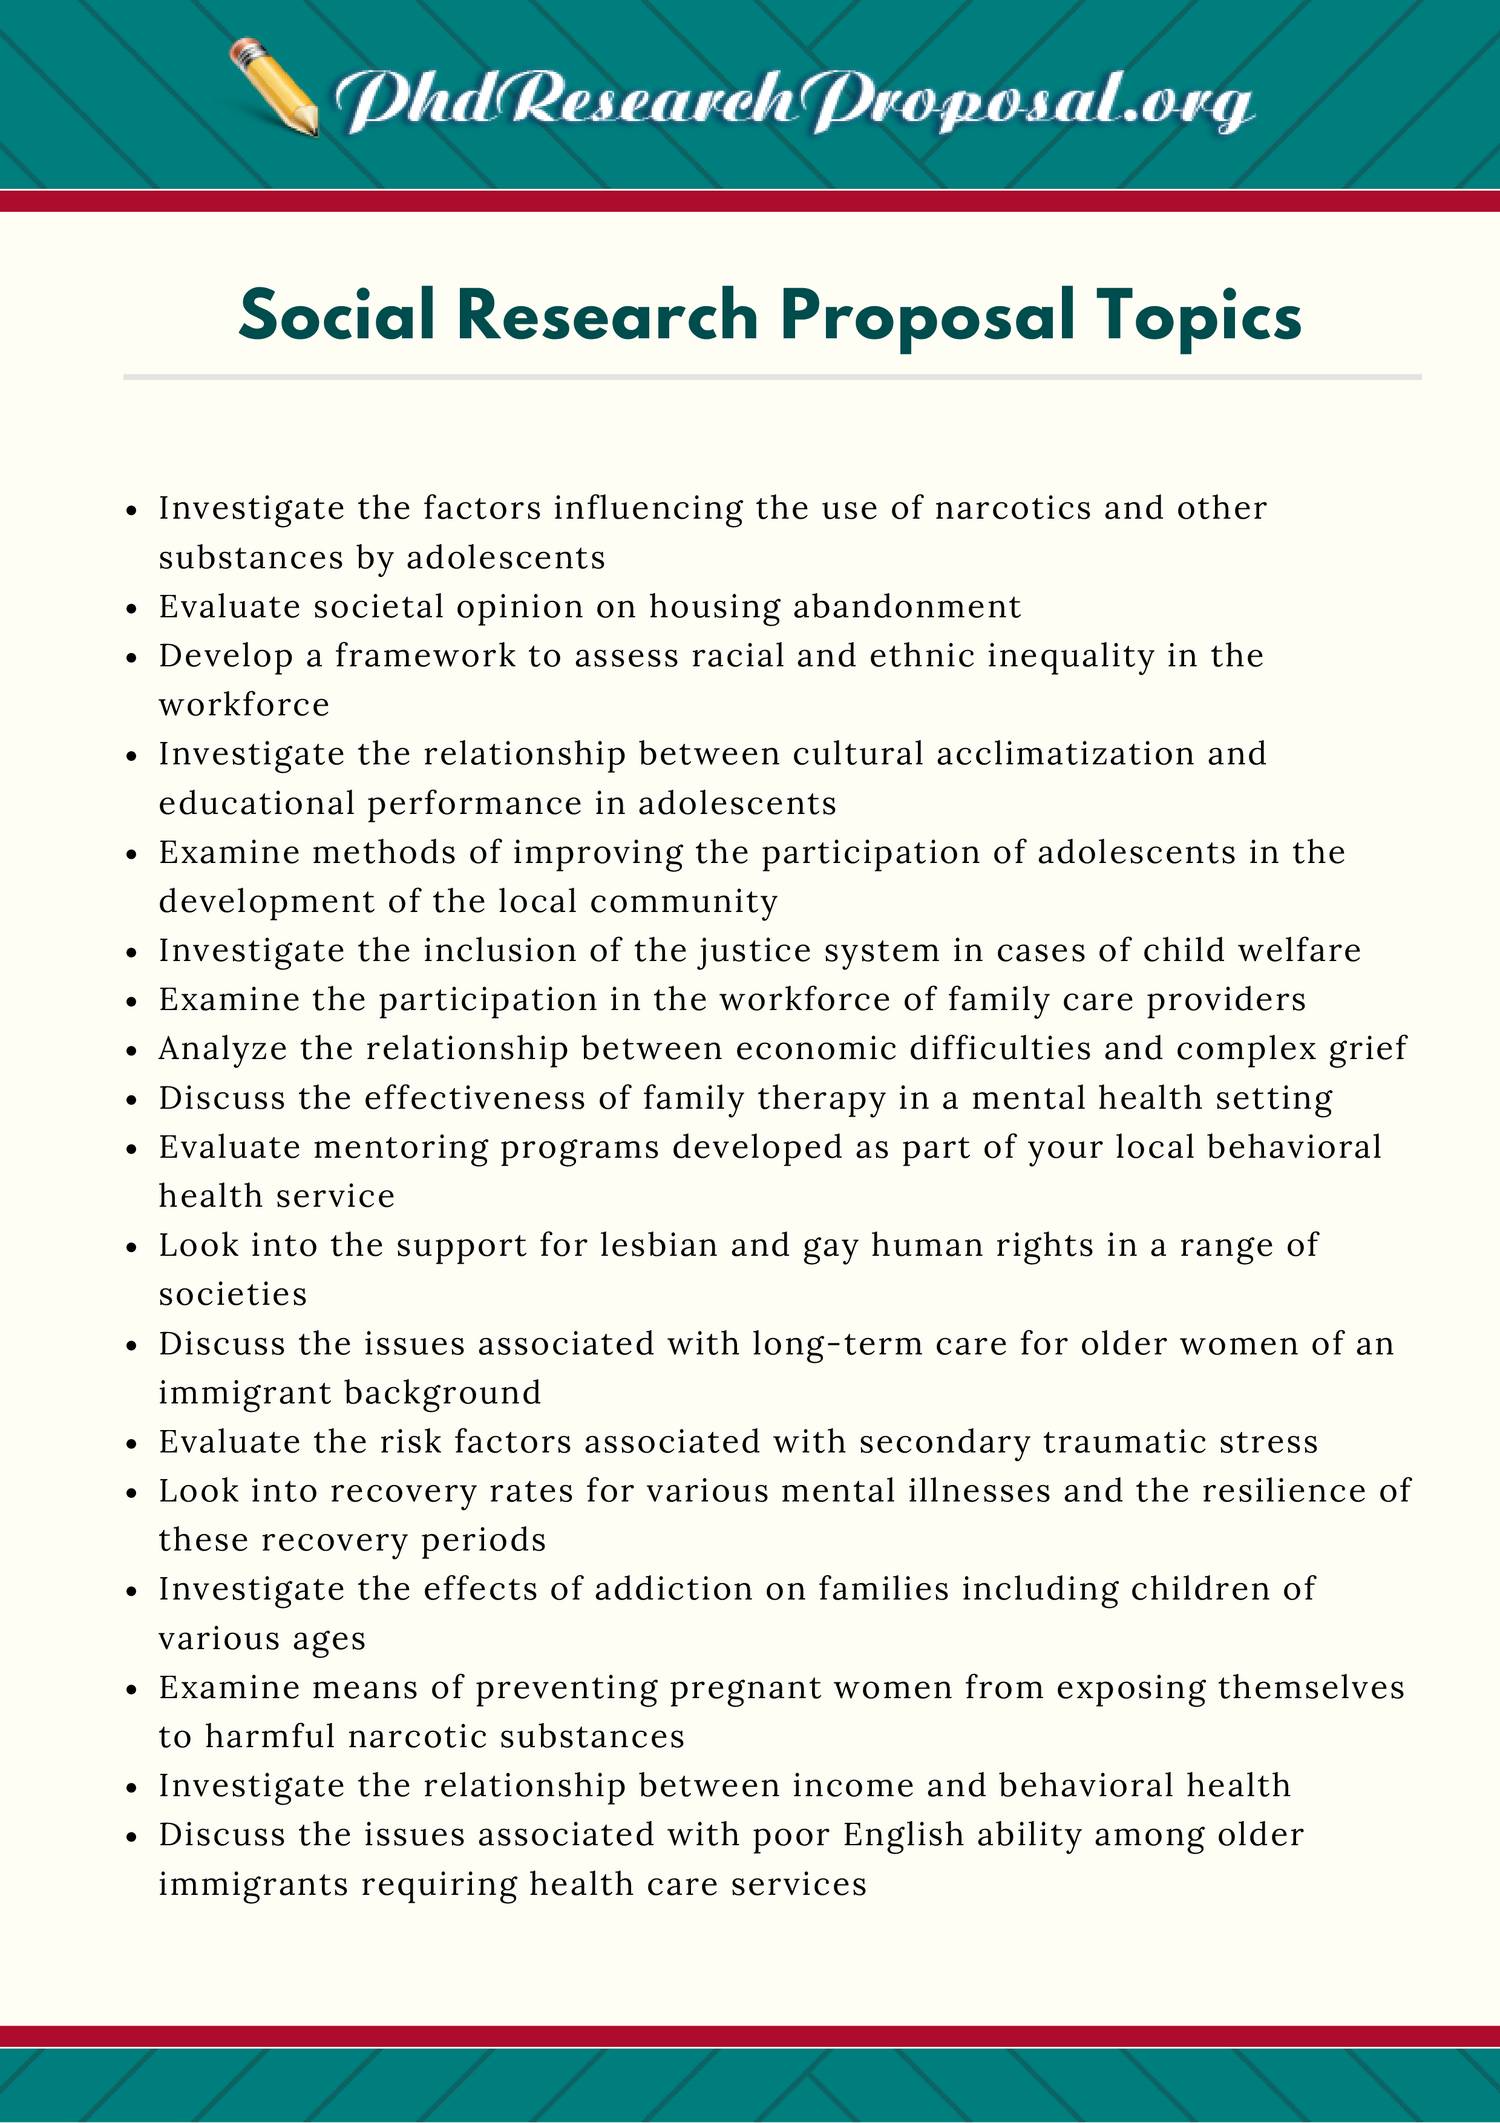 examples of research questions in social work